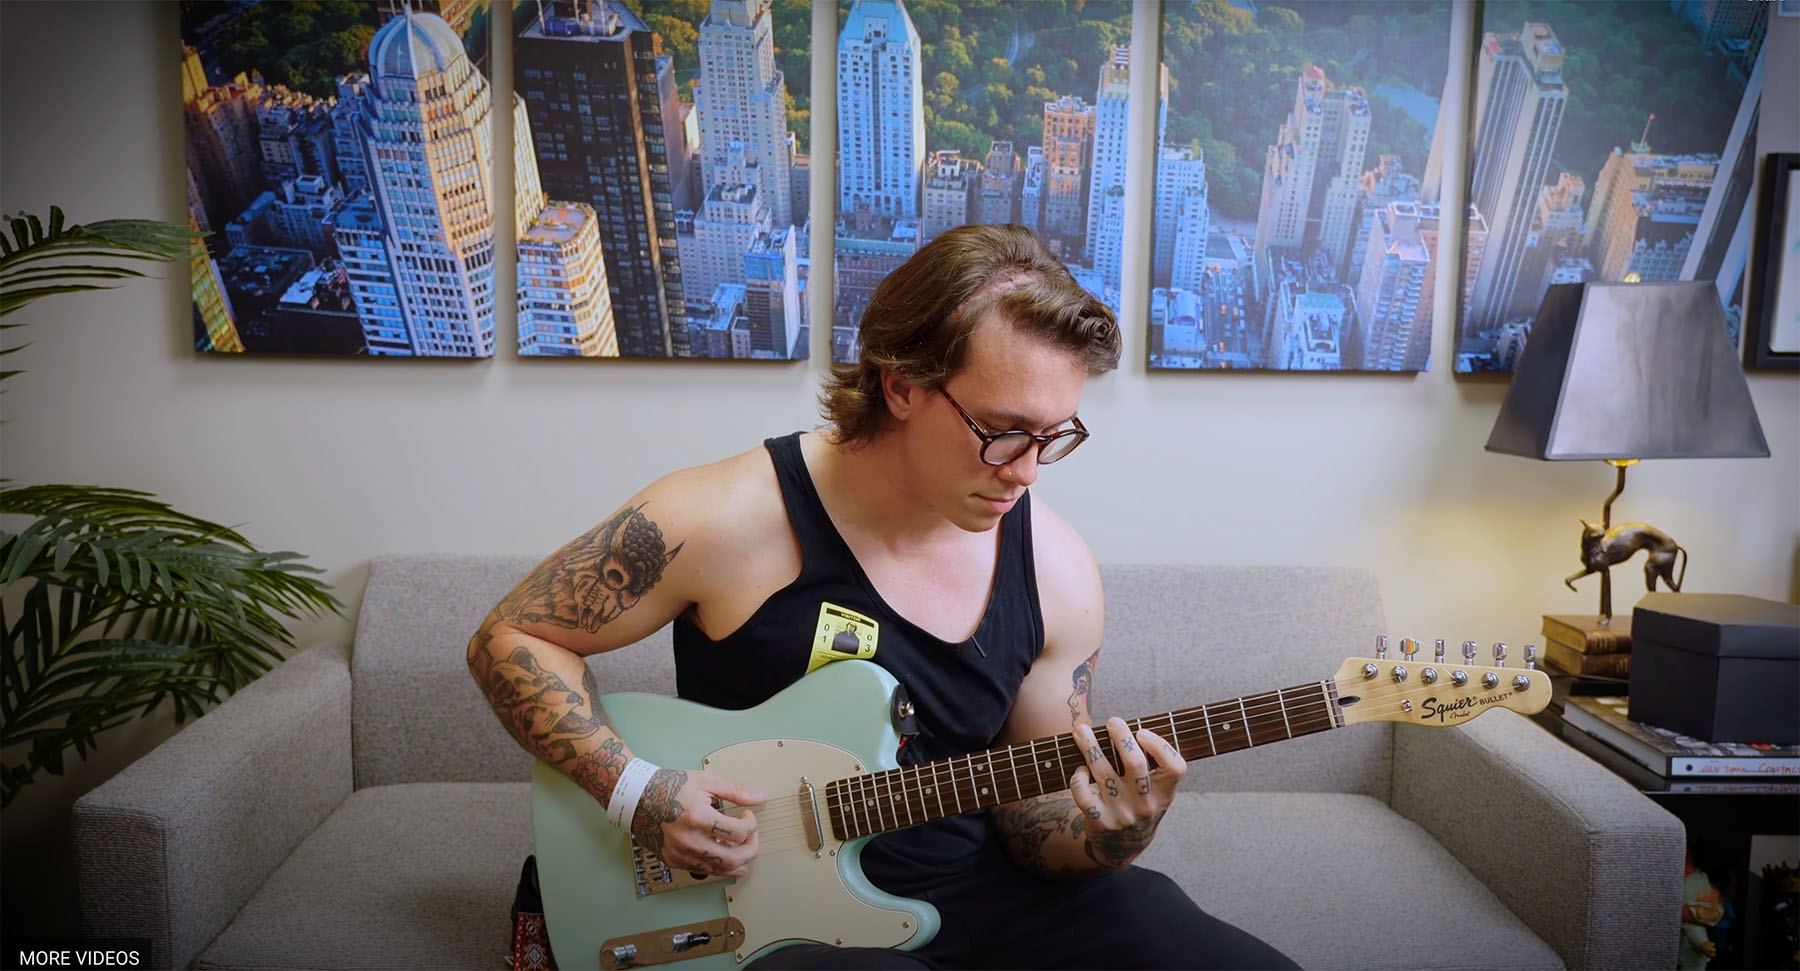 Christian Nolen had a tumor removed from his brain and played guitar during the surgery.